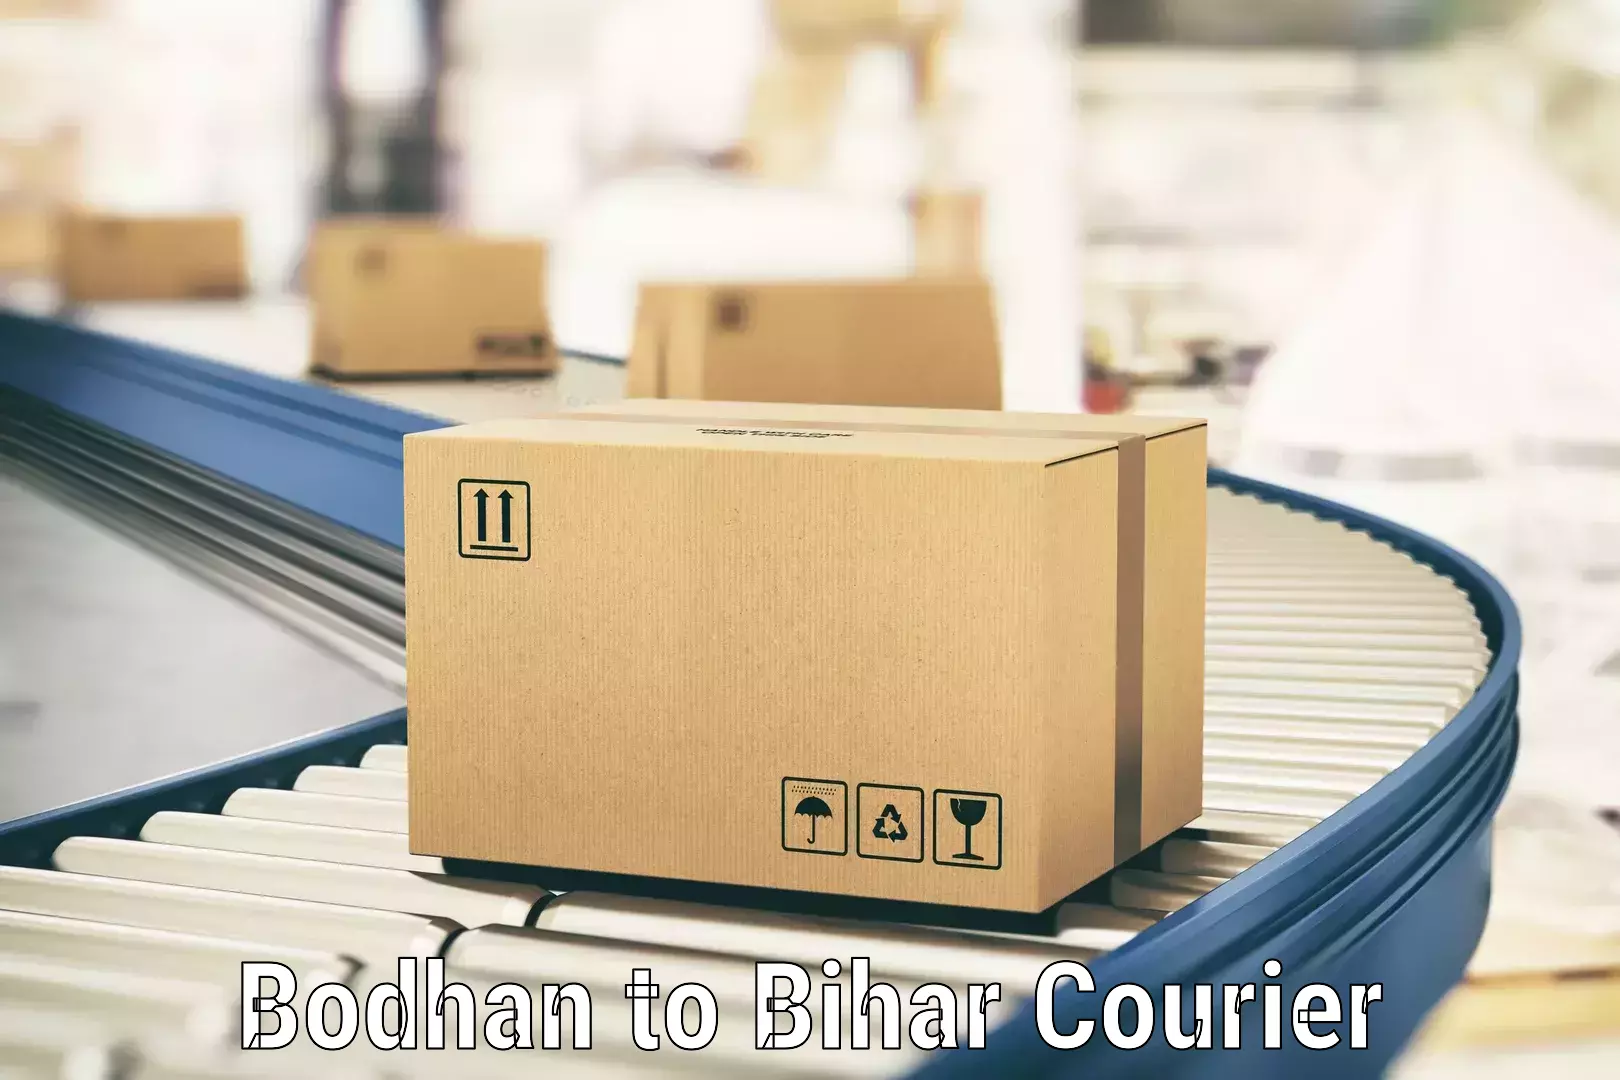 Reliable courier service in Bodhan to Bihta